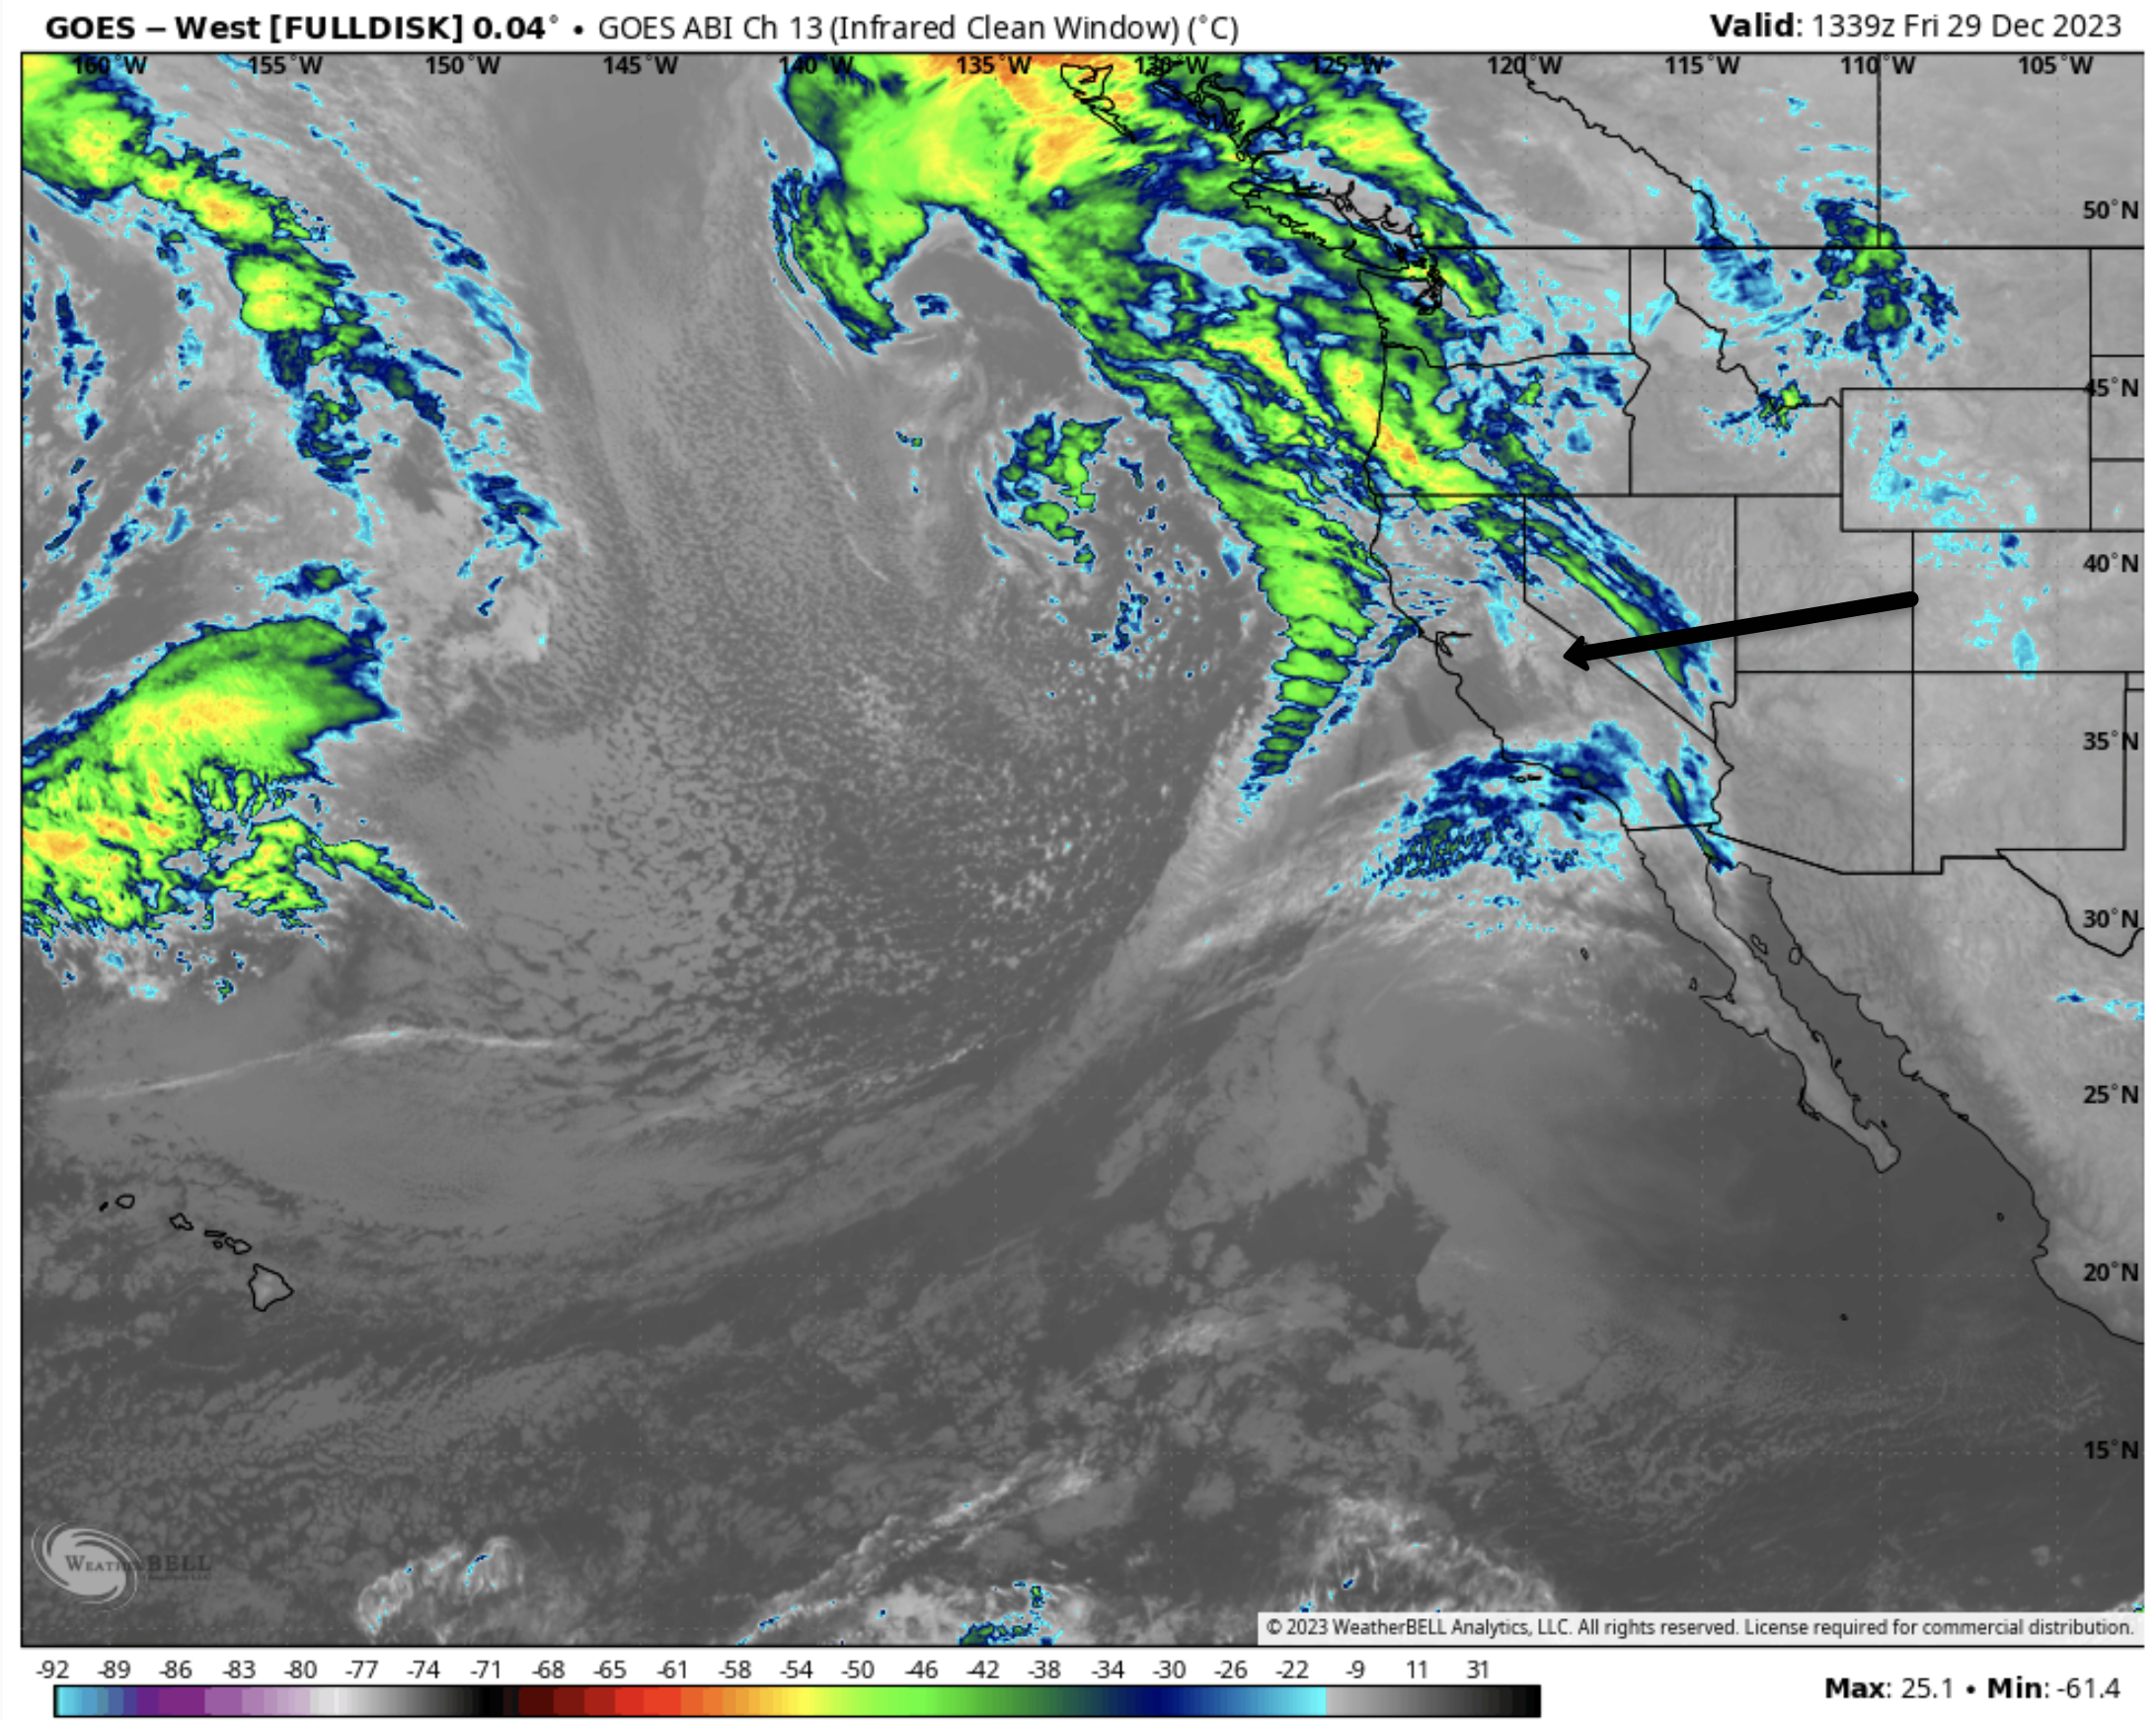 Morning Satellite Image for the West Coast @ Mammoth Mountain Weather